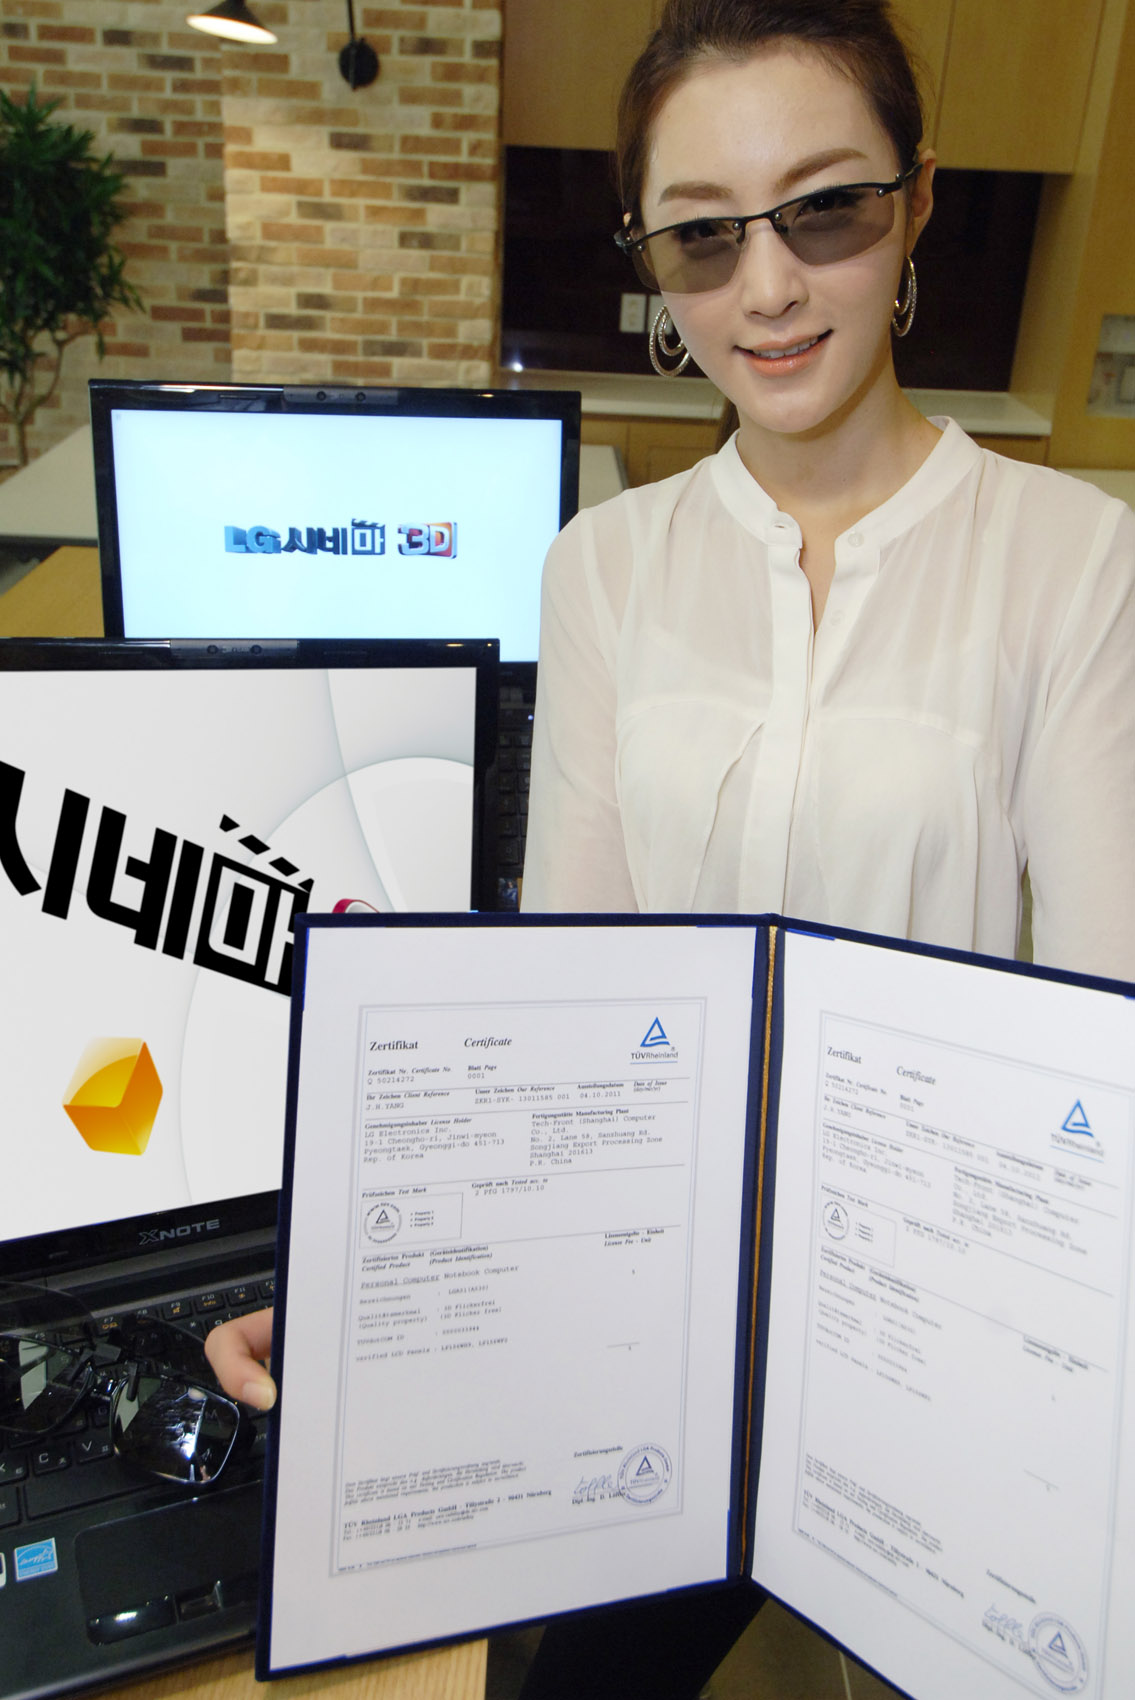 A model wearing 3D glasses while holding up the official TUV Rheinland certification letter of LG’s 3D Notebook